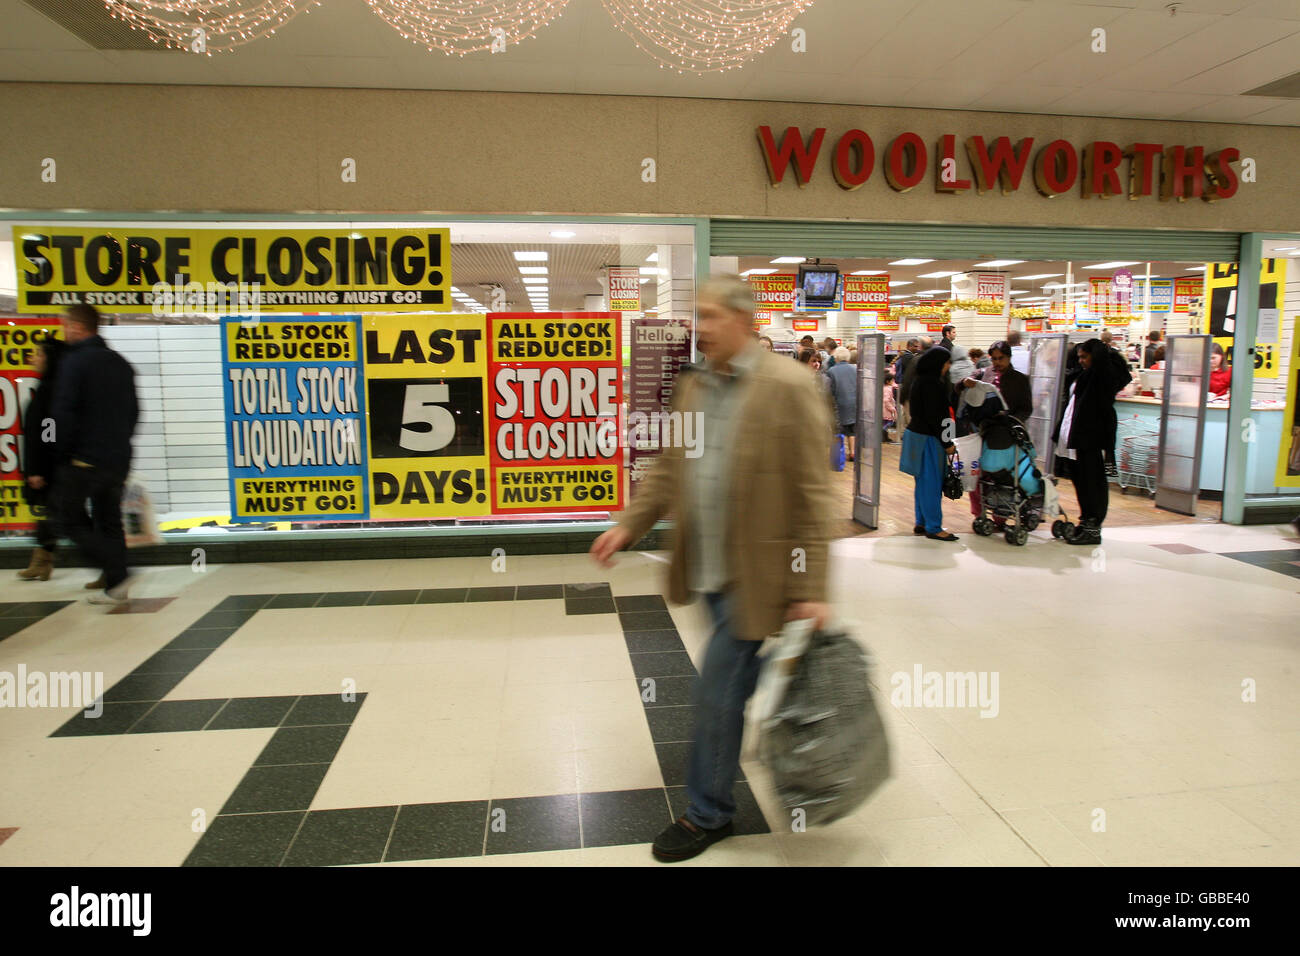 Woolworths closures Stock Photo